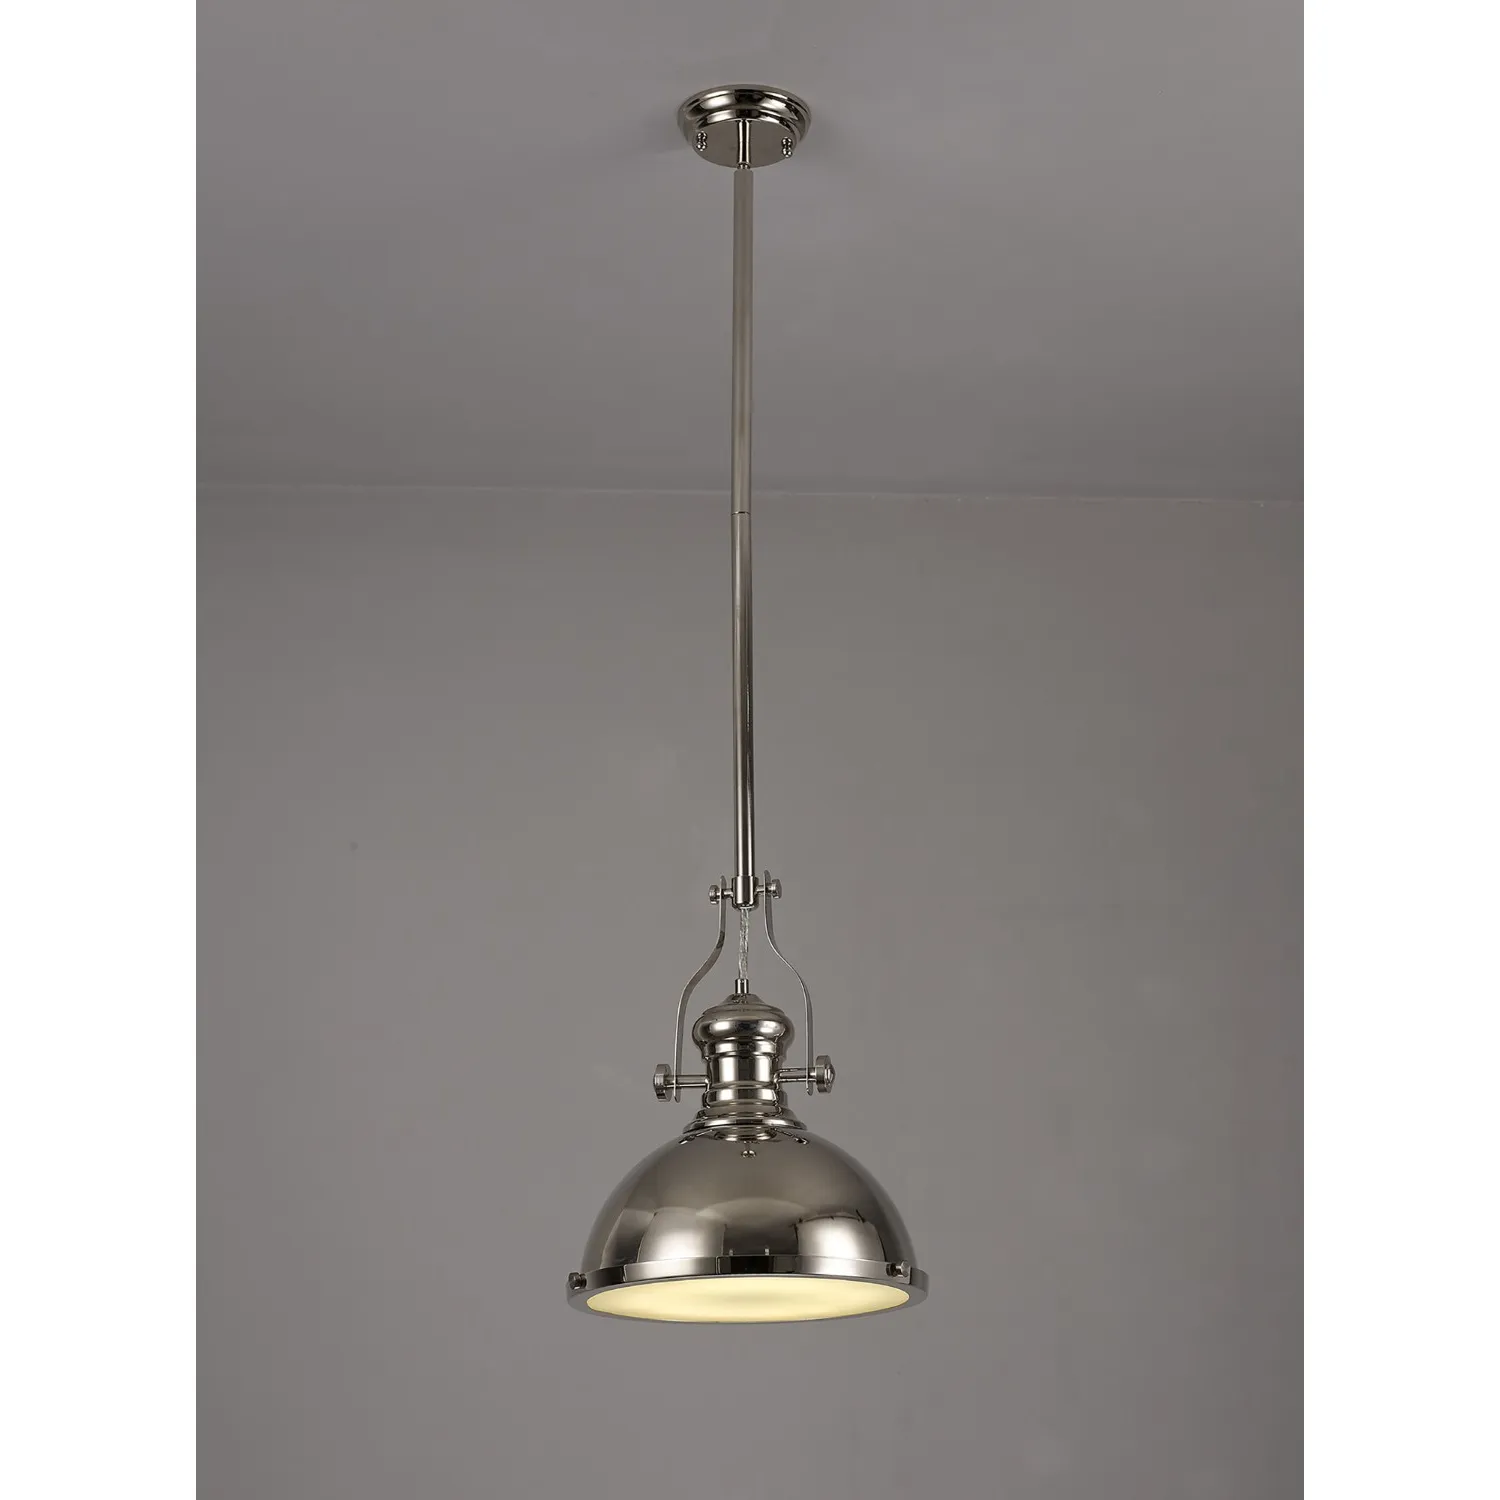 Sandy Pendant, 1 x E27, Polished Nickel Frosted Glass